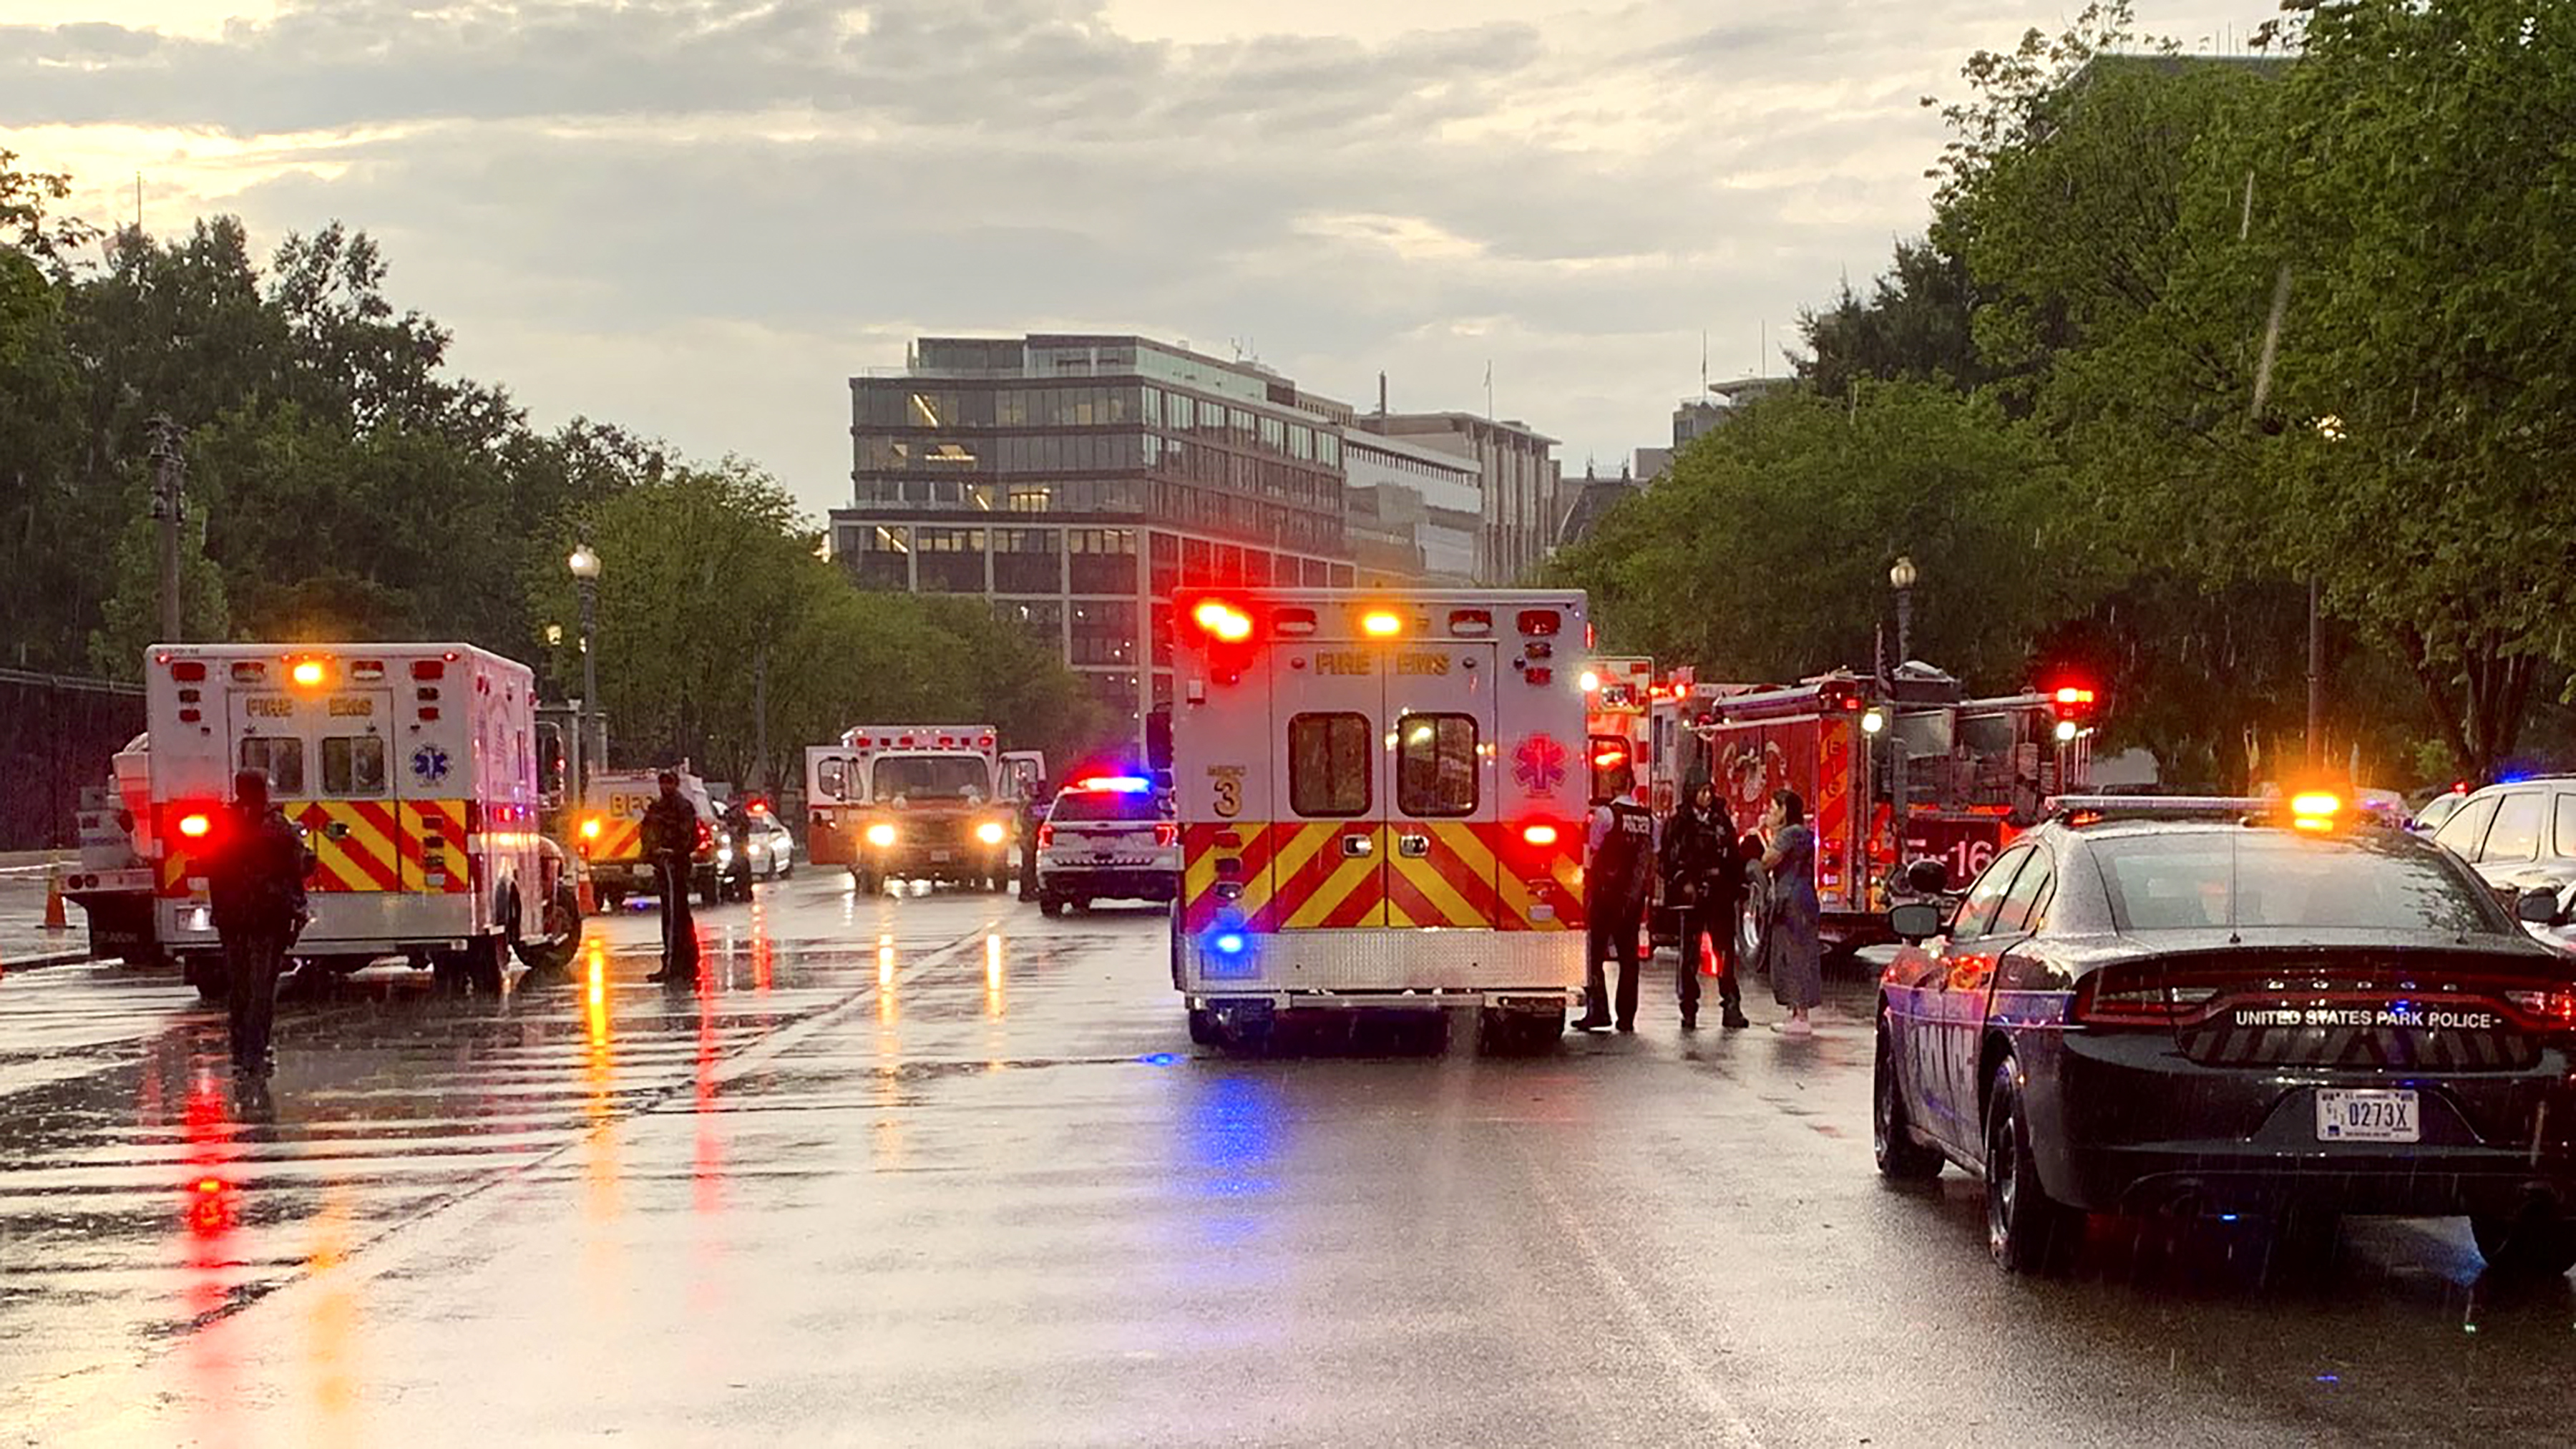 'You will never think that simply standing outside will take your life' | 3 people dead, 1 critically injured after lightning strike near White House